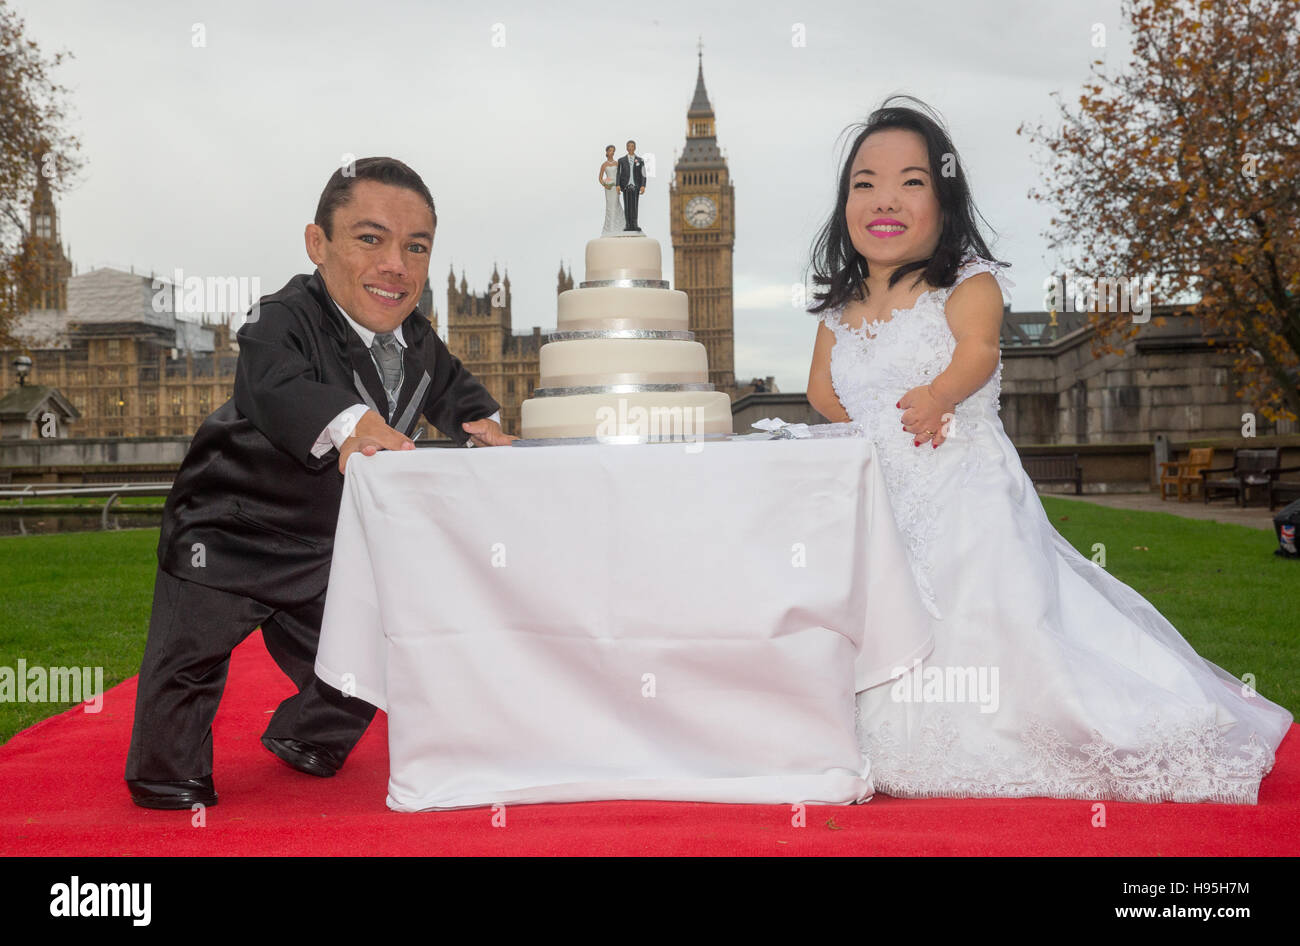 Paulo Gabriel da Silva Barros and Katyucia Hoshino are officially the world's shortest couple at 70 inches combined height Stock Photo